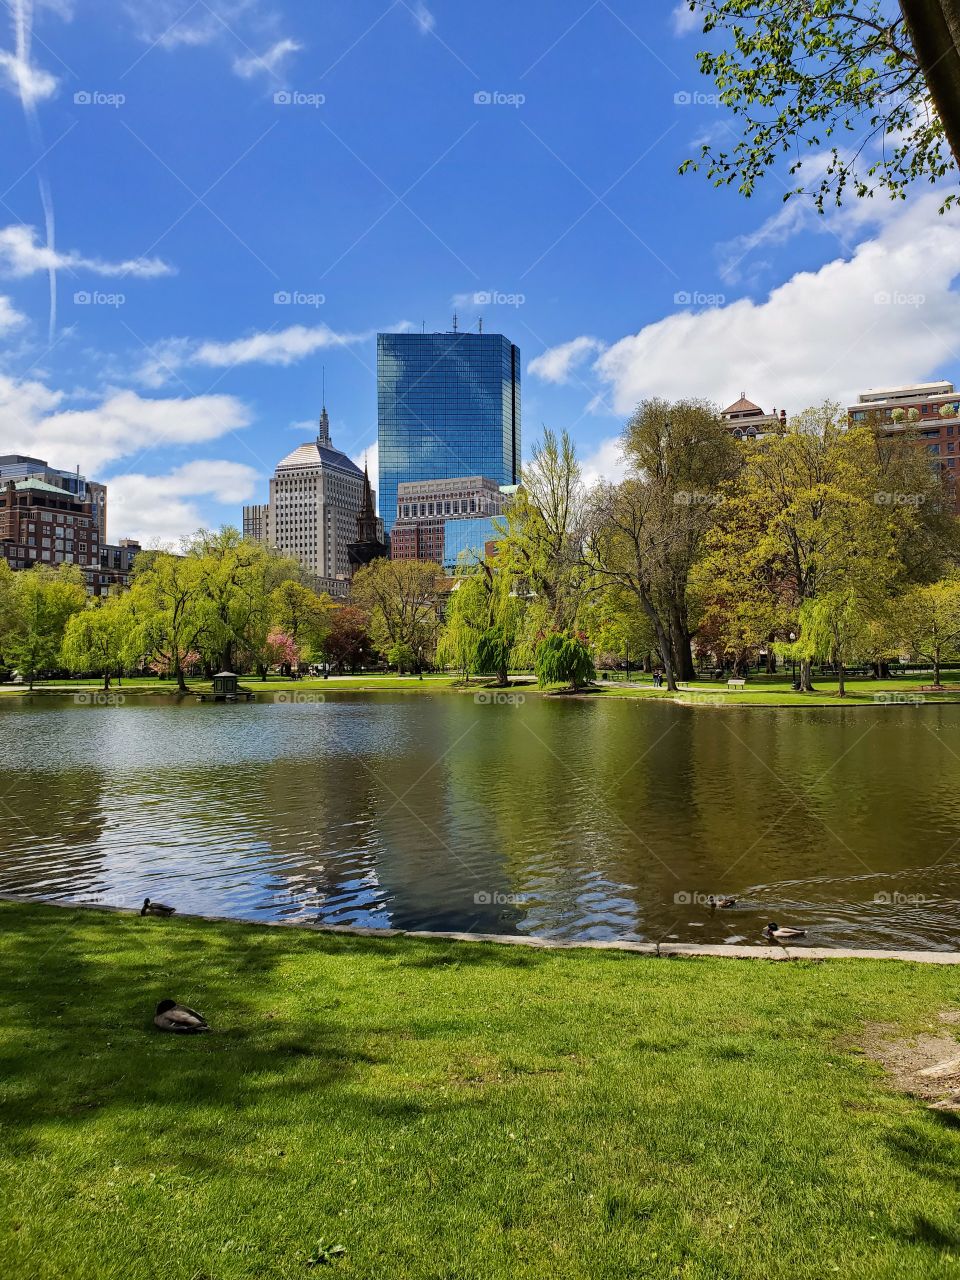 Peaceful and serene. A quaint pond with rich history. Famous, at a different angle, for it's 'Good Will Hunting' appearance. Water with a small Boston skyline in the background.